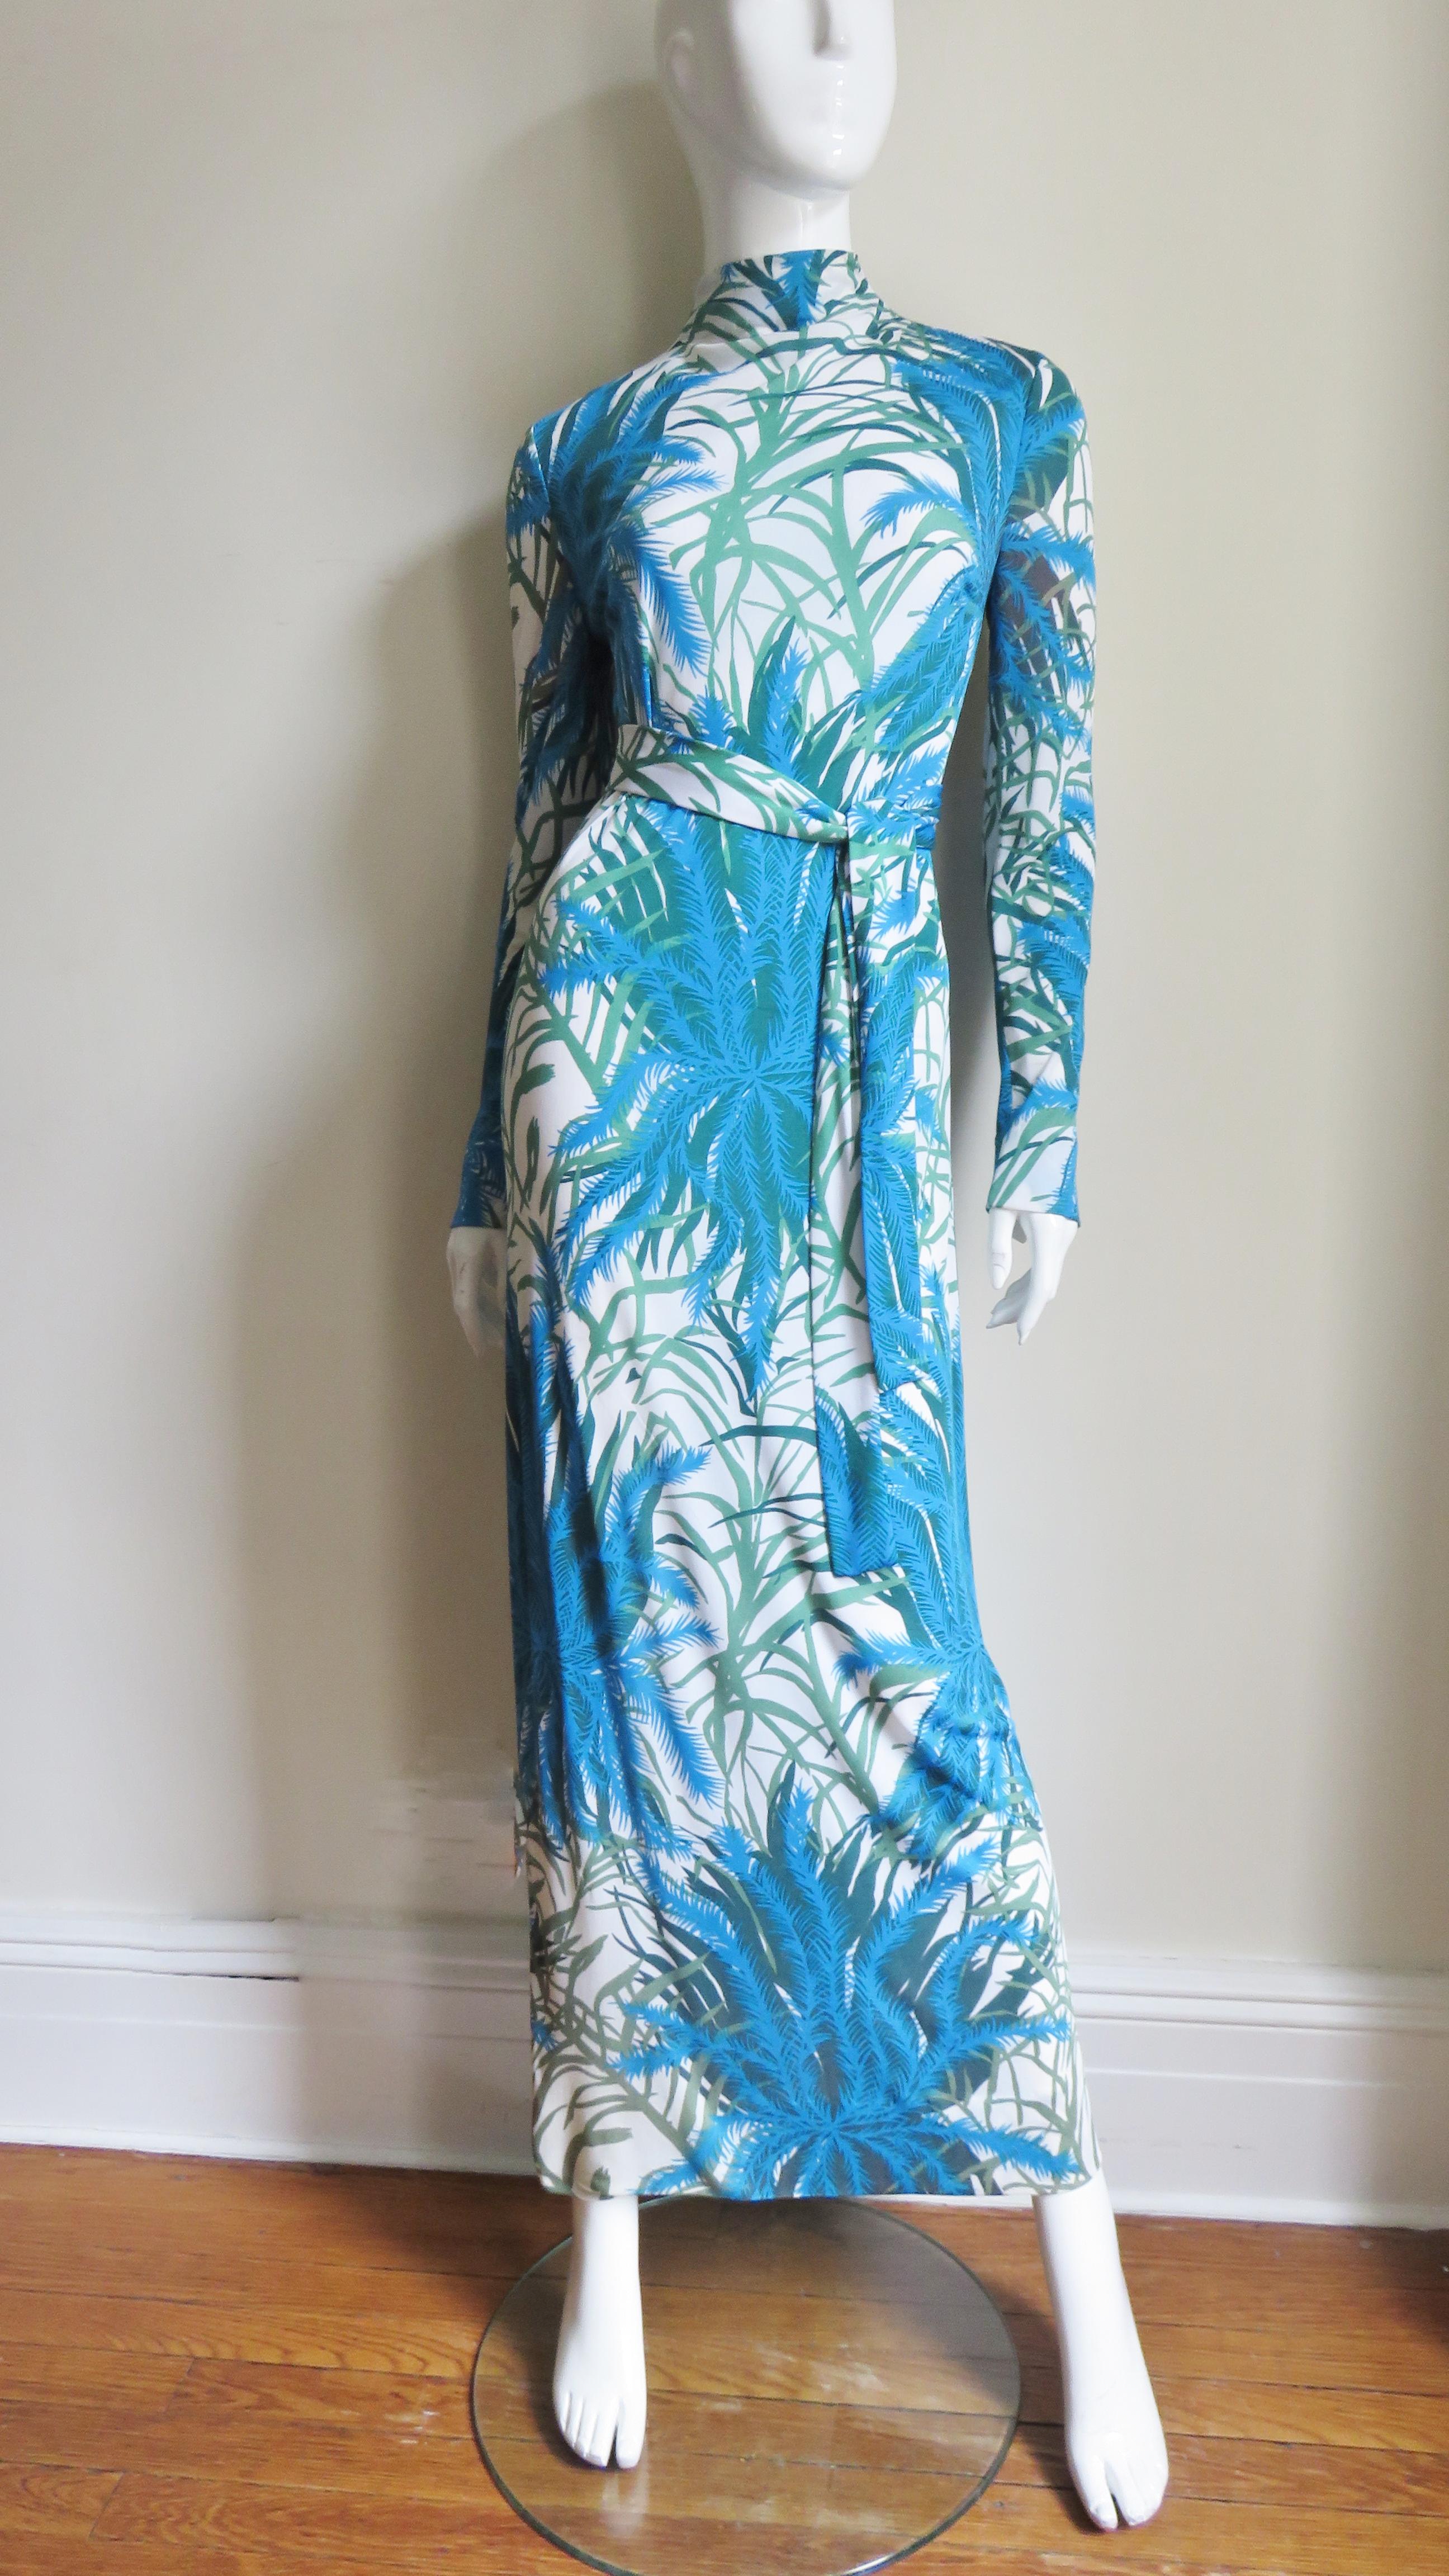 A maxi dress and over skirt in fine silk knit in a beautiful pattern of ferns and leaves in shades of green and blue on a white background from La Mendola. The dress is a long sheath with a stand up collar closing in the back with 3 dozen small self